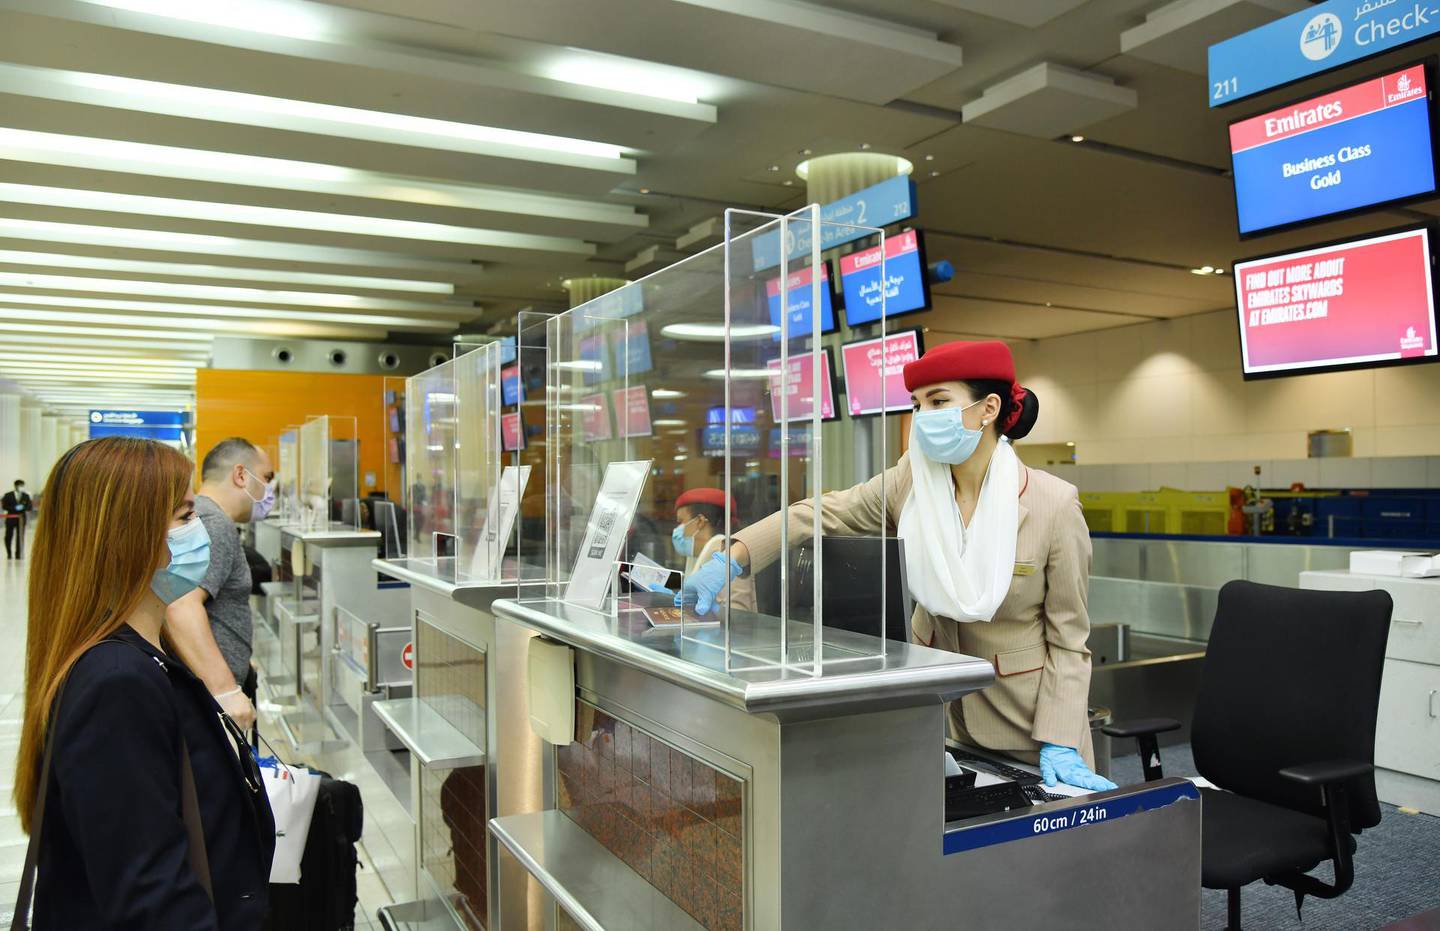 Emirates check-in counters at Dubai Airport. Courtesy Emirates 